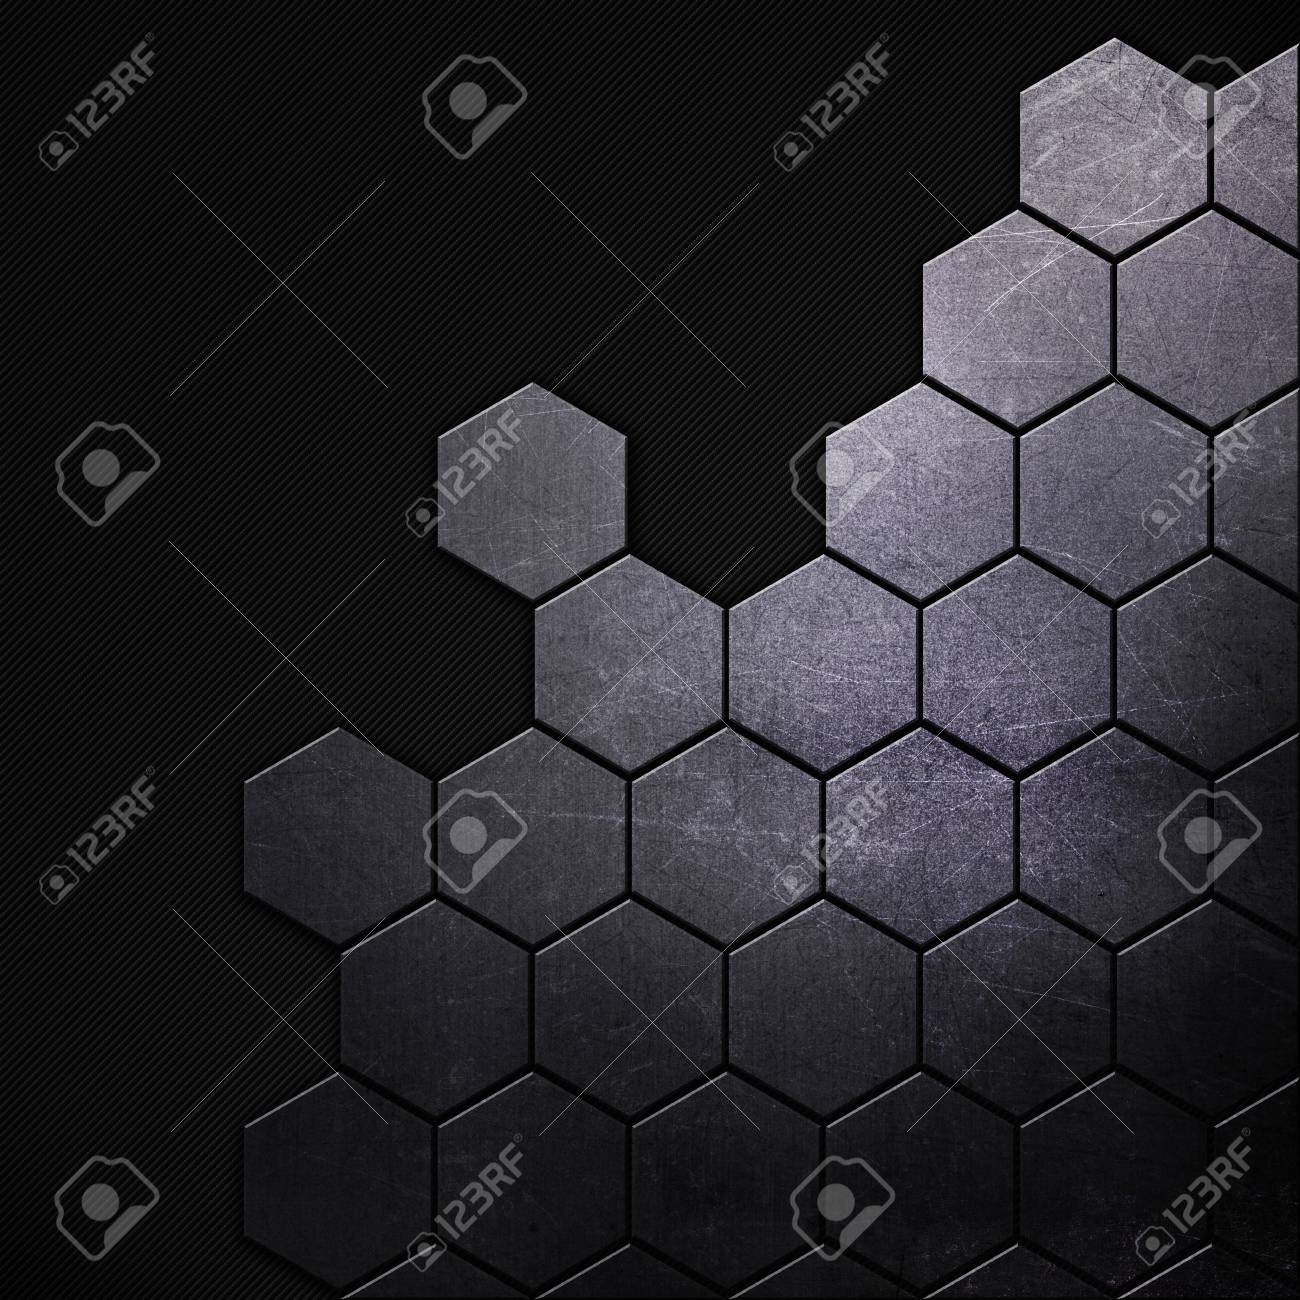 Metallic Background With Hexagonal Shapes On A Carbon Fibre